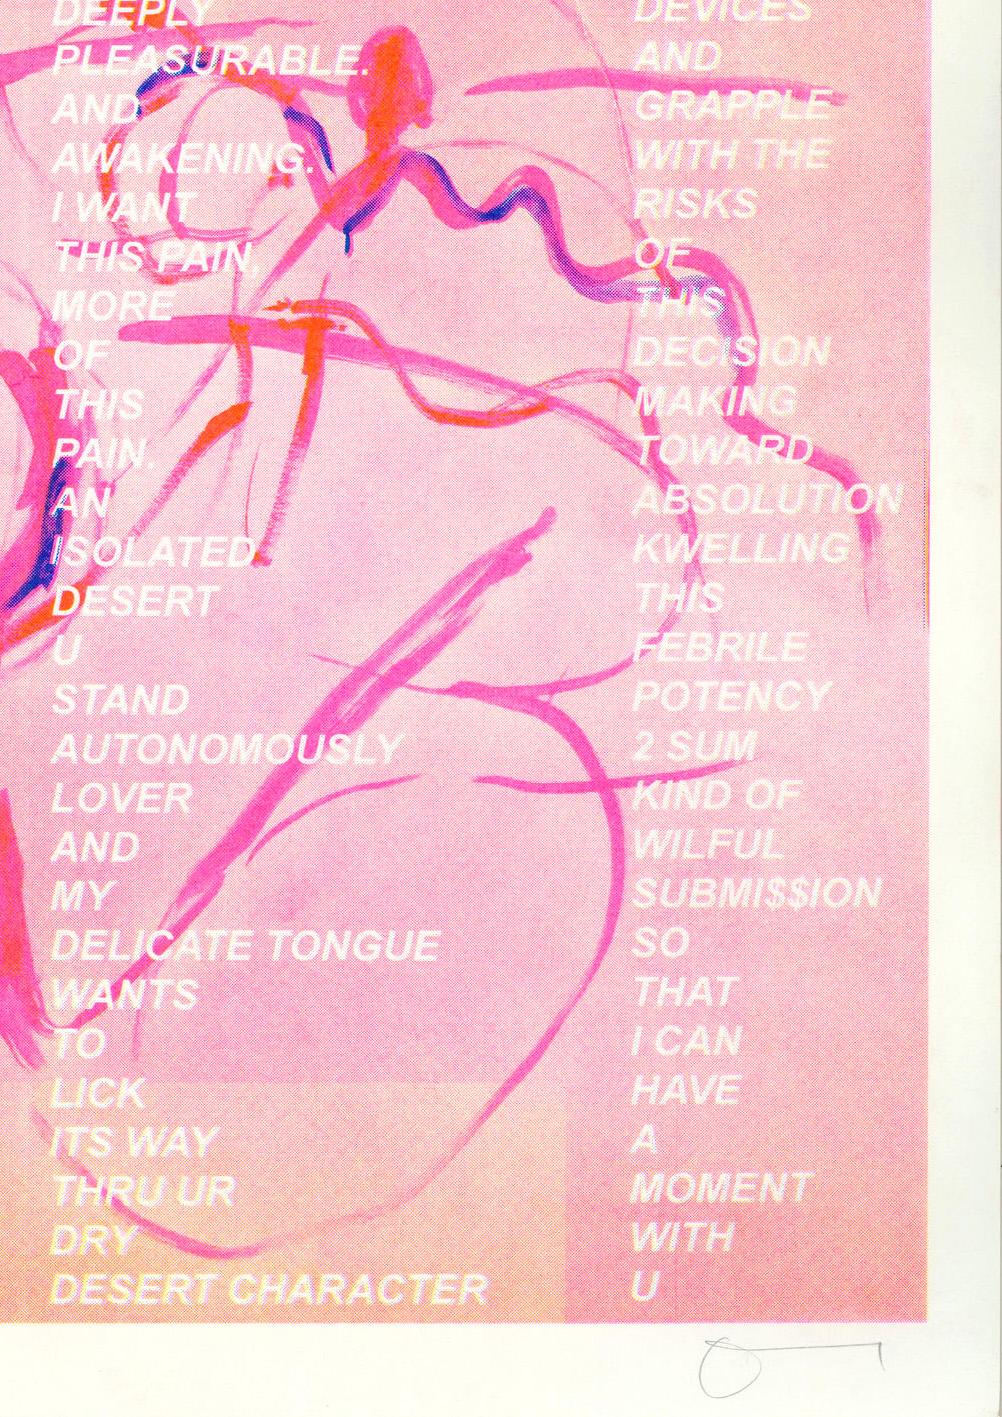 Olivia Strange

Wilful Submission ii, 2021

Risograph print on Olin natural white 170gsm paper

42 x 29.7 cm (A3)

Edition of 100

Signed and numbered by the artist

Sold unframed

Olivia Strange’s prints surface the queer experience and offer an